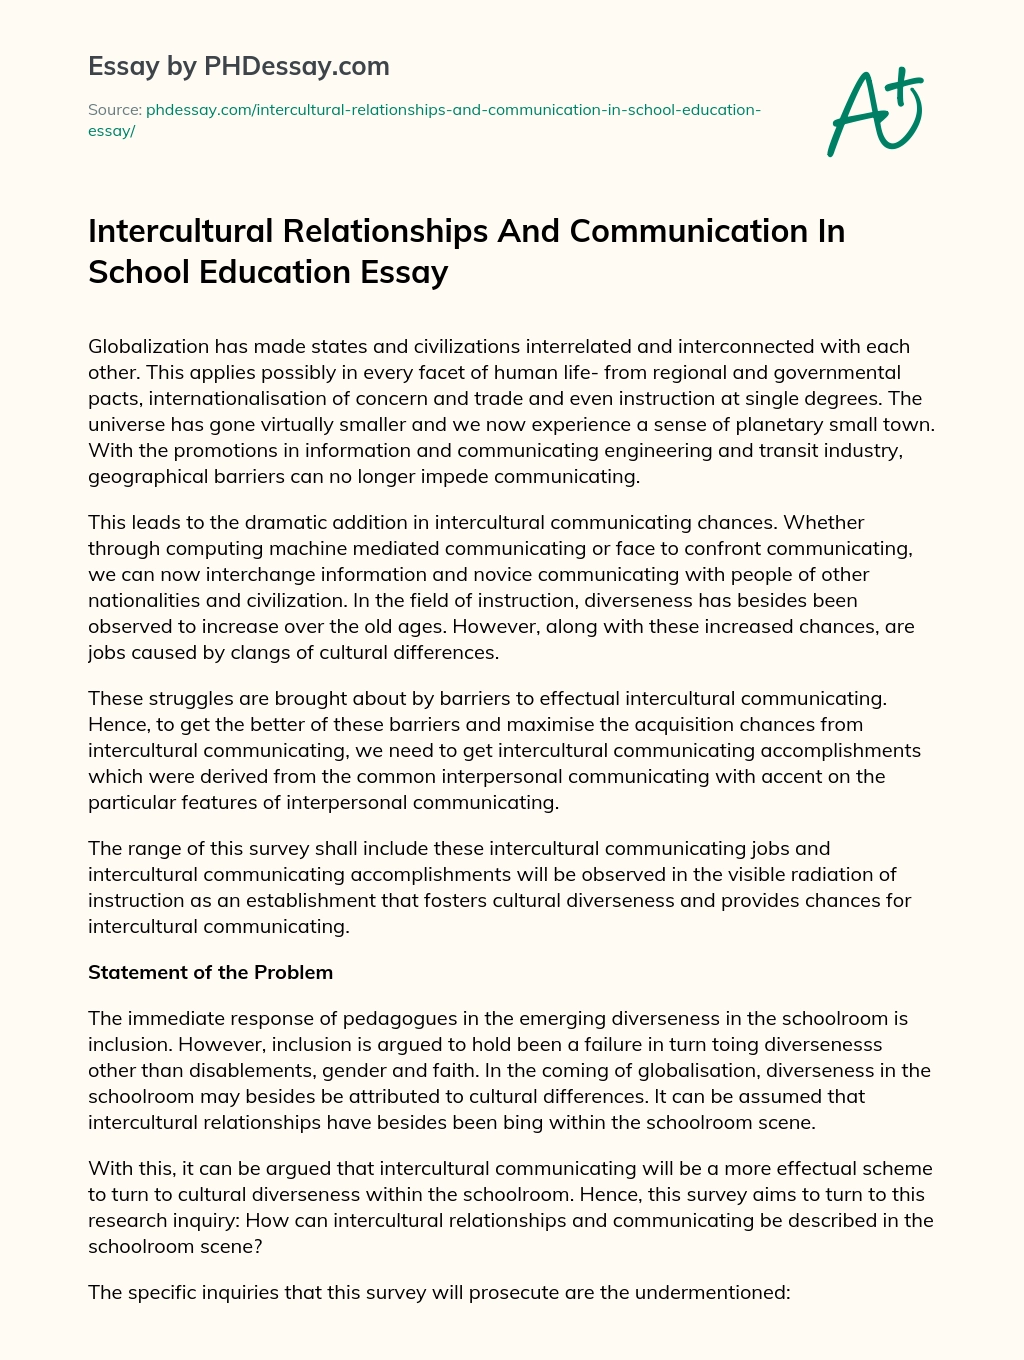 Intercultural Relationships And Communication In School Education Essay essay